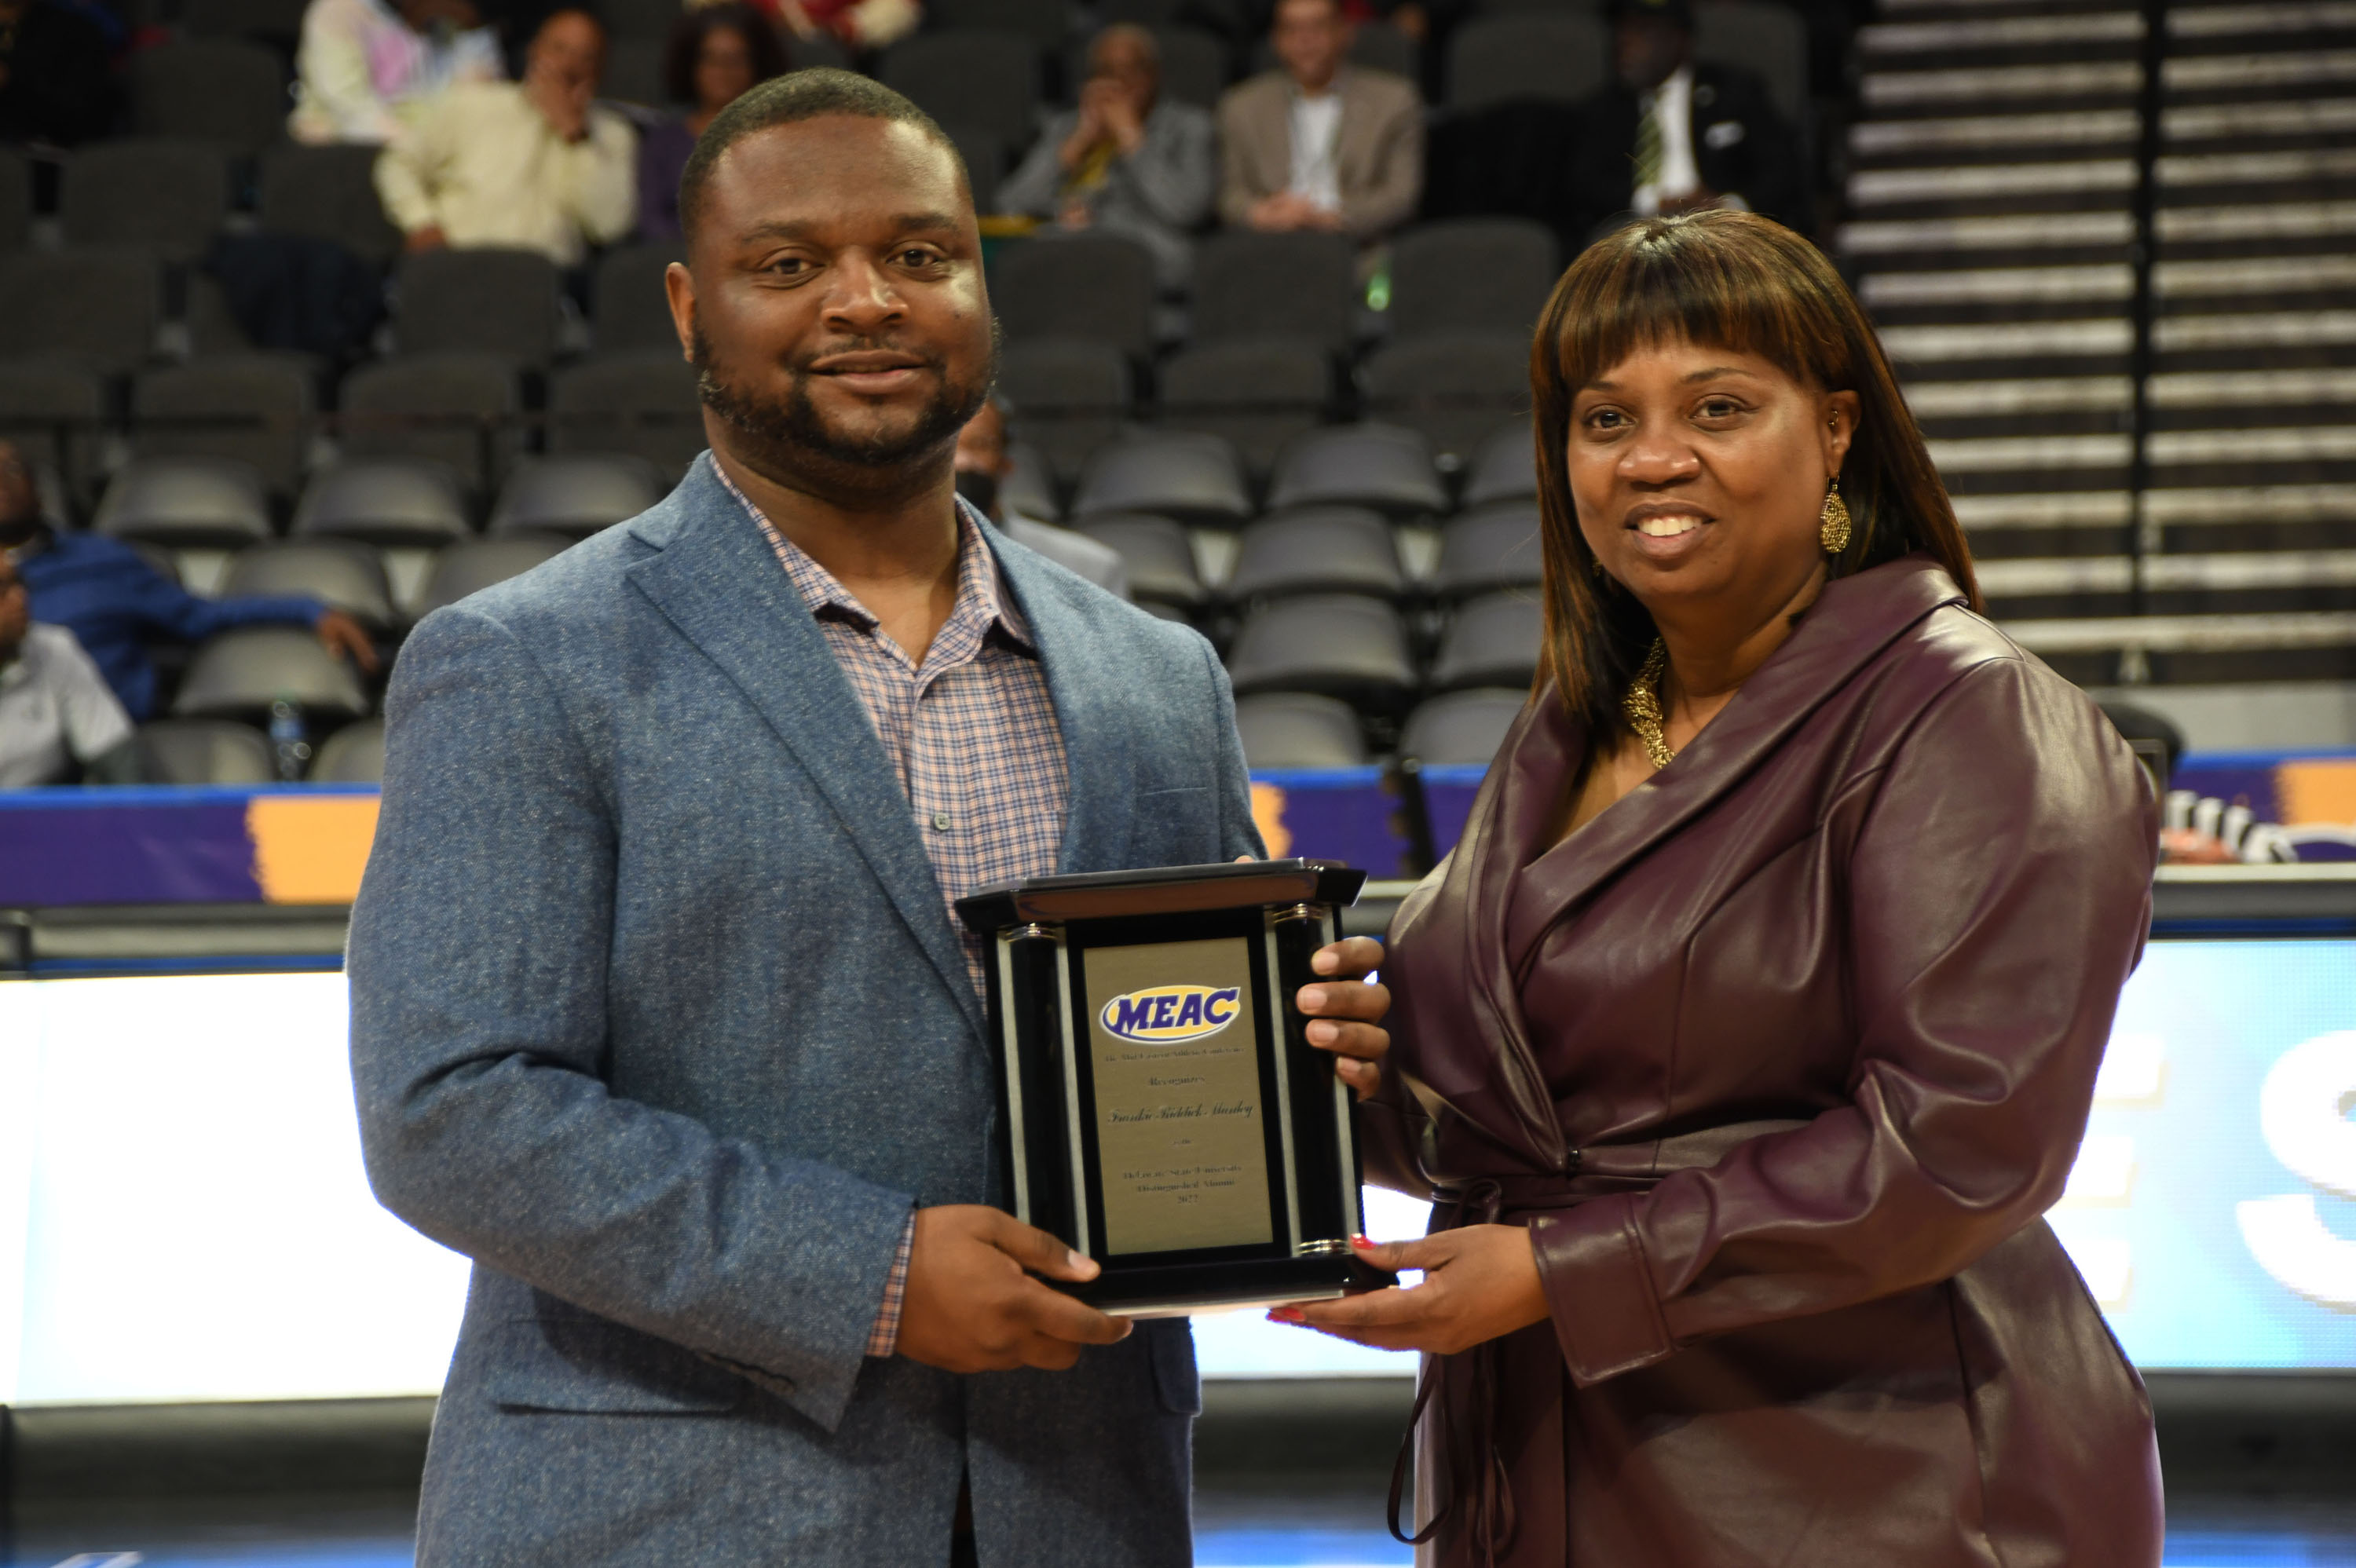 Darius Manley, son of Frankie Manley, accepts the Alumni Award on behalf of his mother from MEAC Commissioner Sonja Stills.